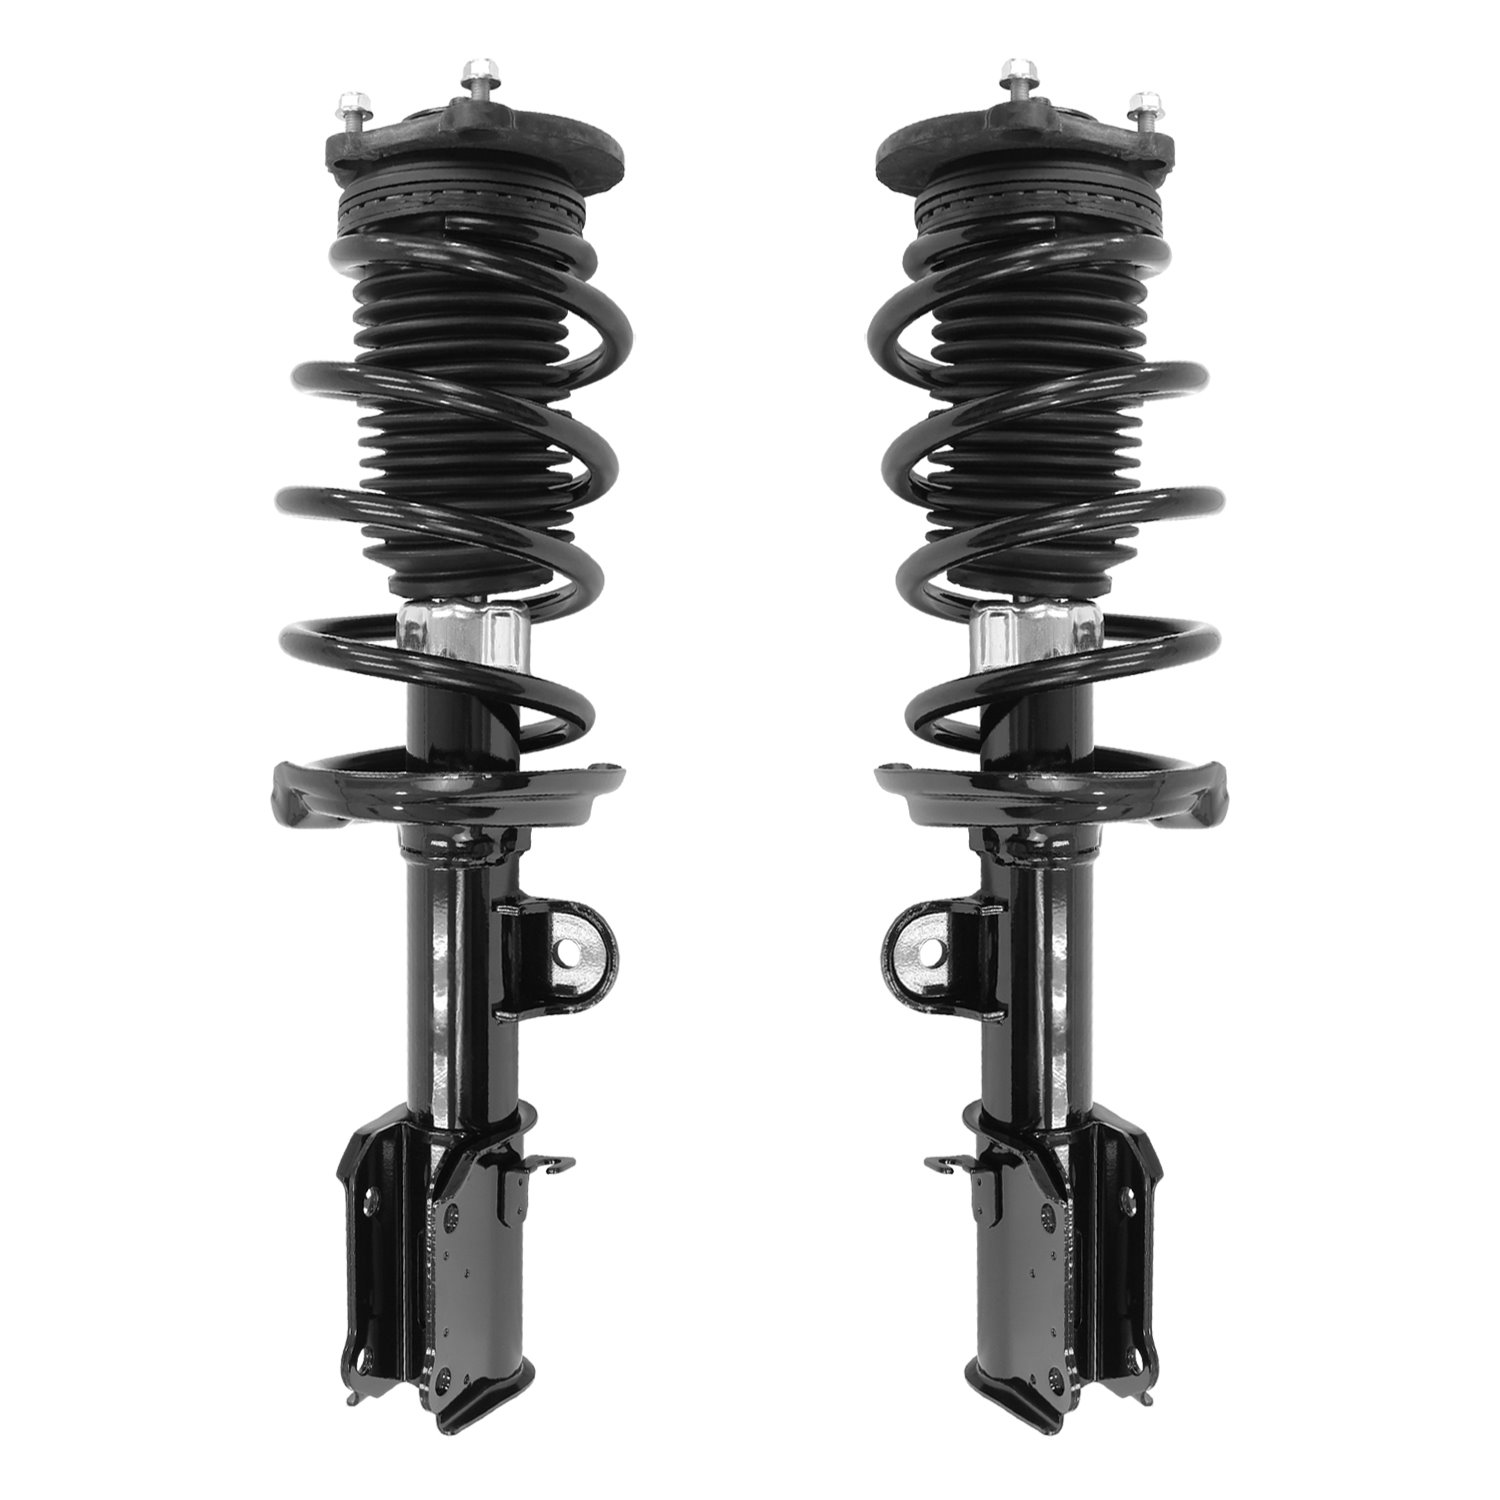 2-13423-13424-001 Front Suspension Strut & Coil Spring Assemby Set Fits Select Ram ProMaster City